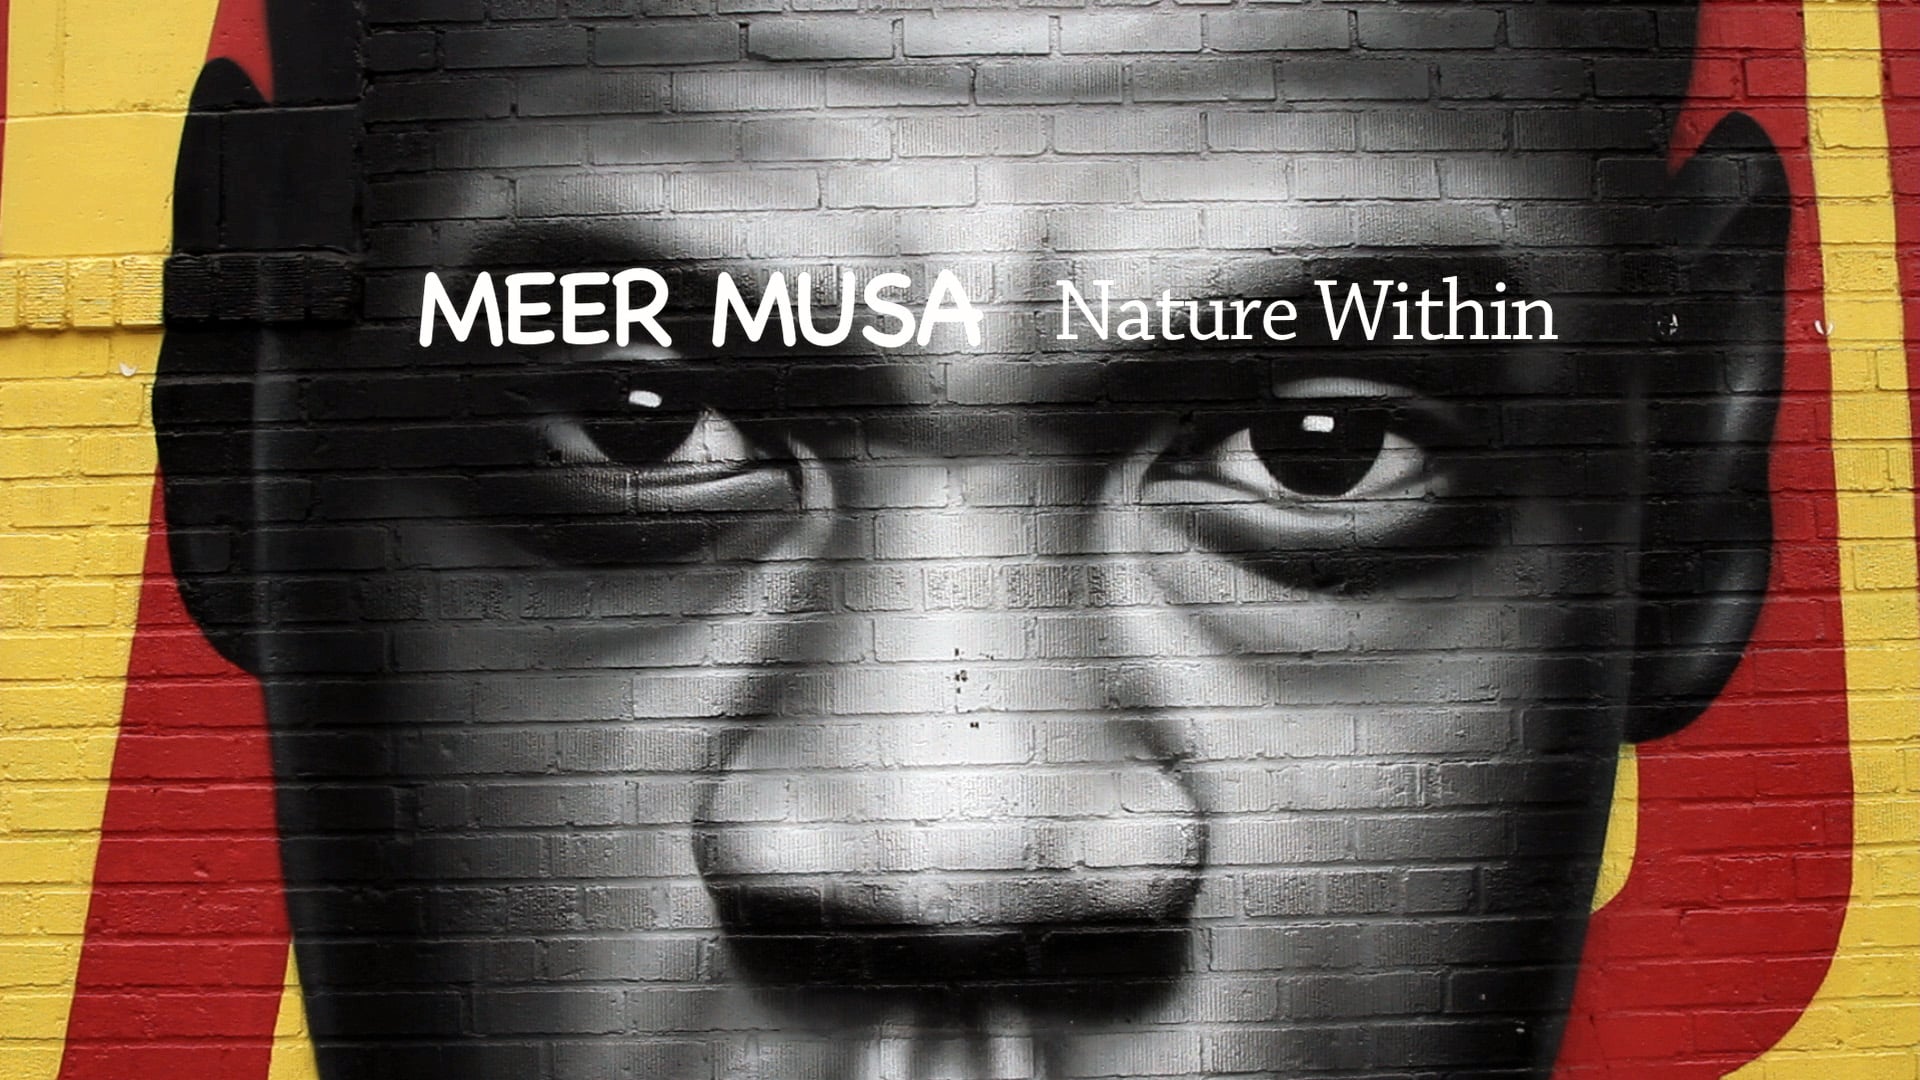 Meer Musa - Nature Within